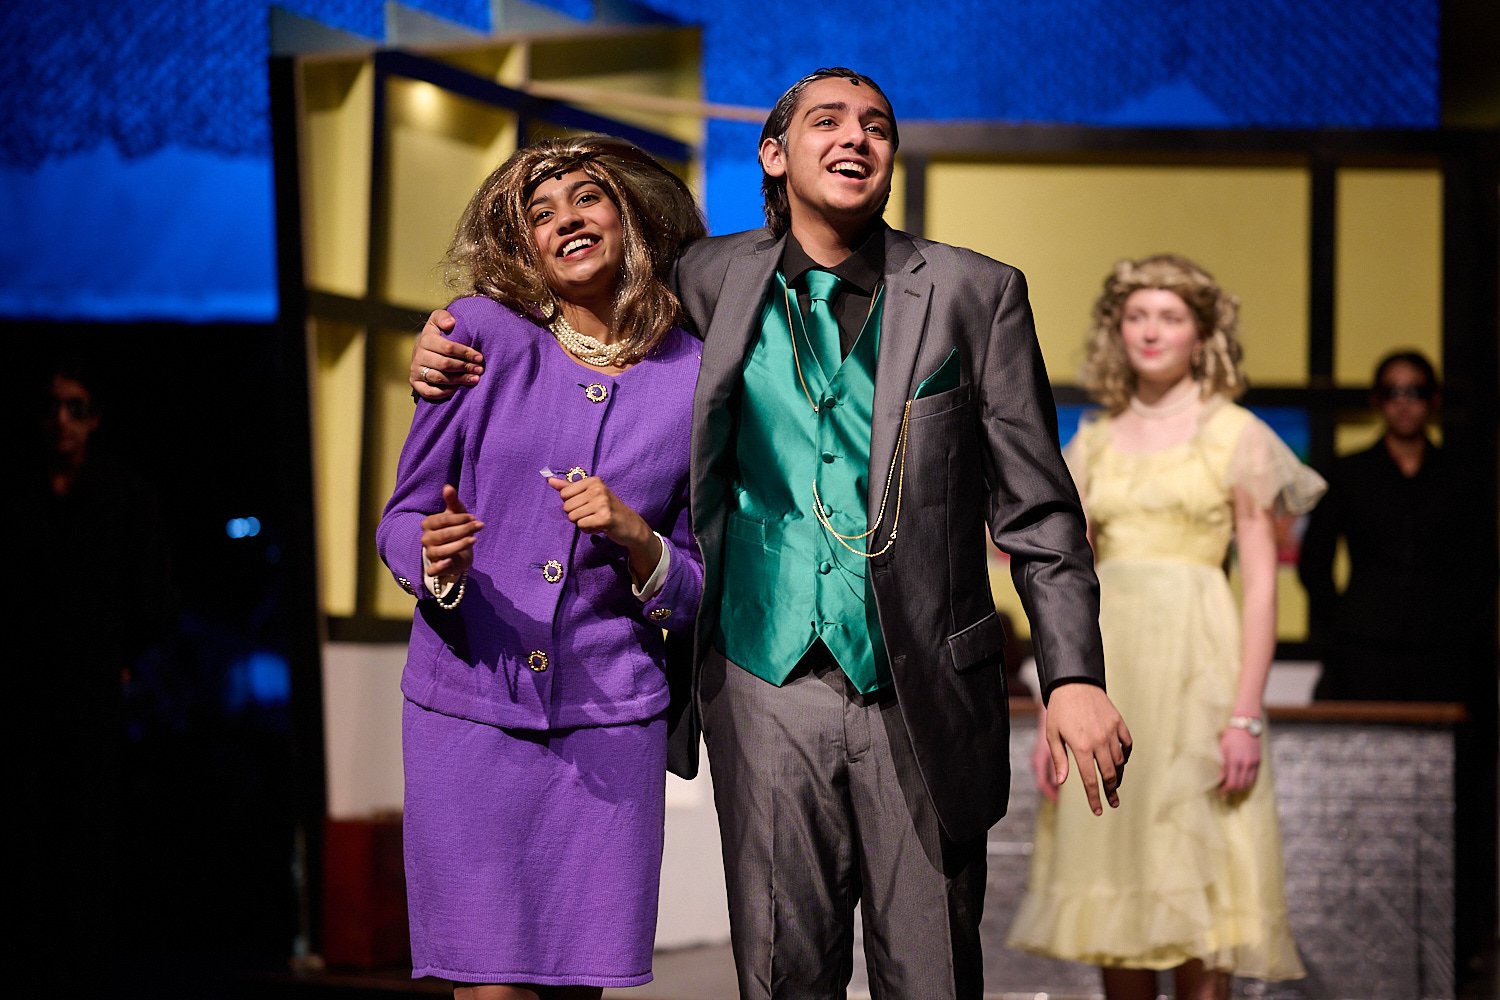  SEWICKLEY, PA, USA - MARCH 2ND 2022: High School students of Sewickley Academy are performing in an annual musical show “Urinetown” running on March 3rd-5th 2022. Ibrahim Khan 